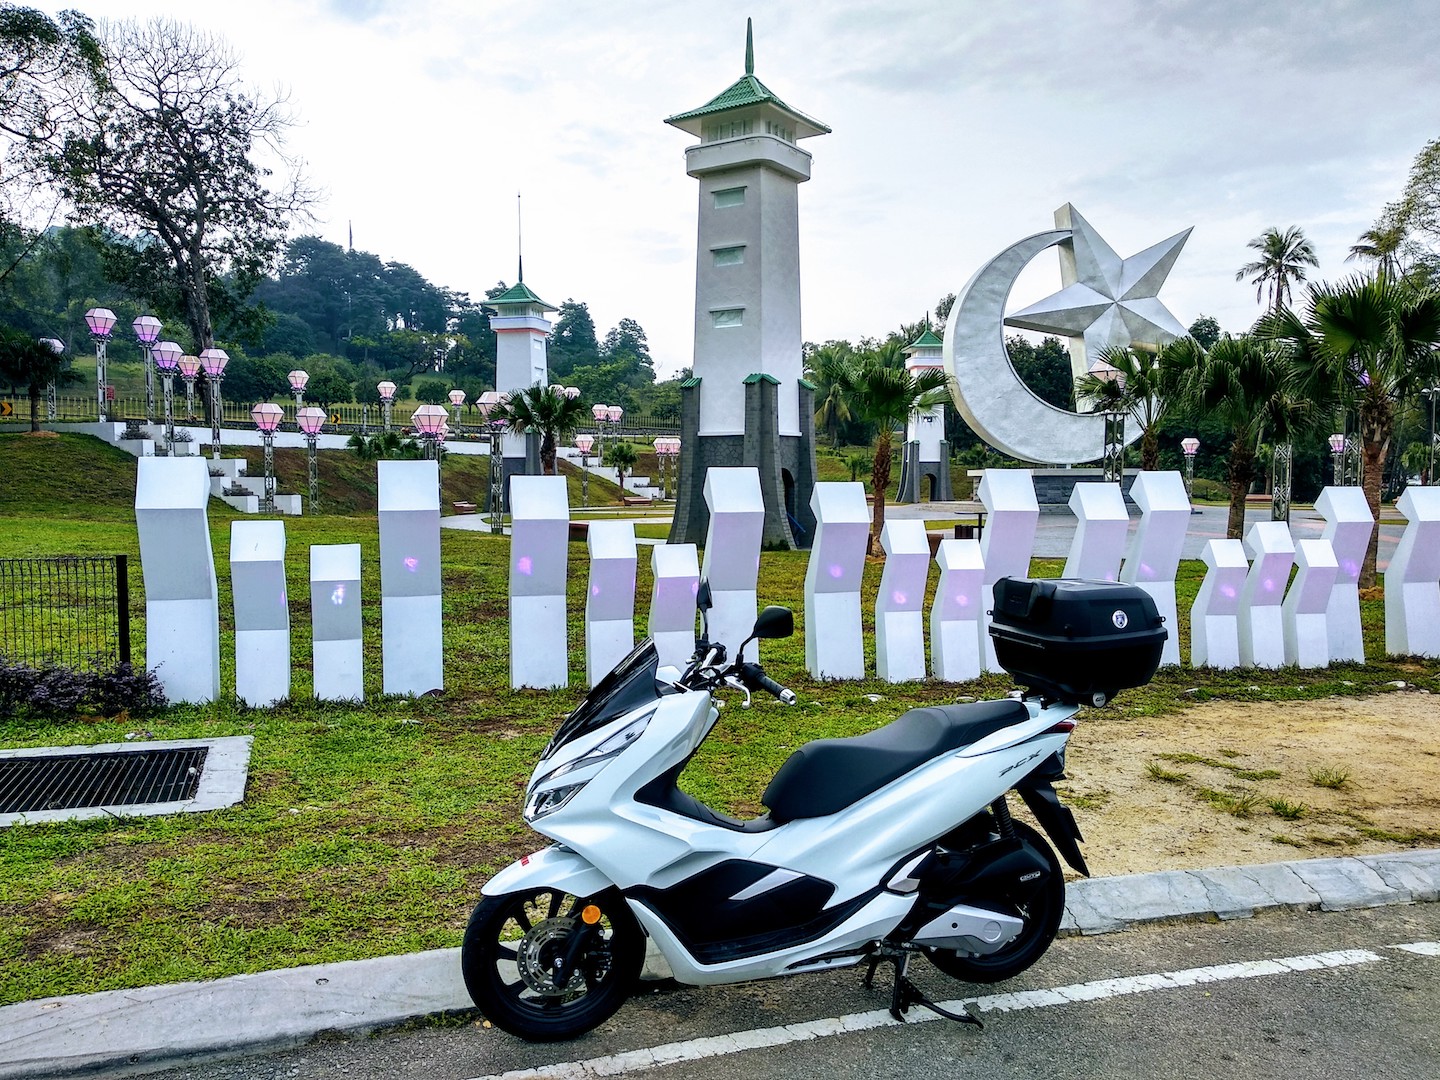 At the foothill of Serene Hill, the Sultan of Johor reside on the Hill